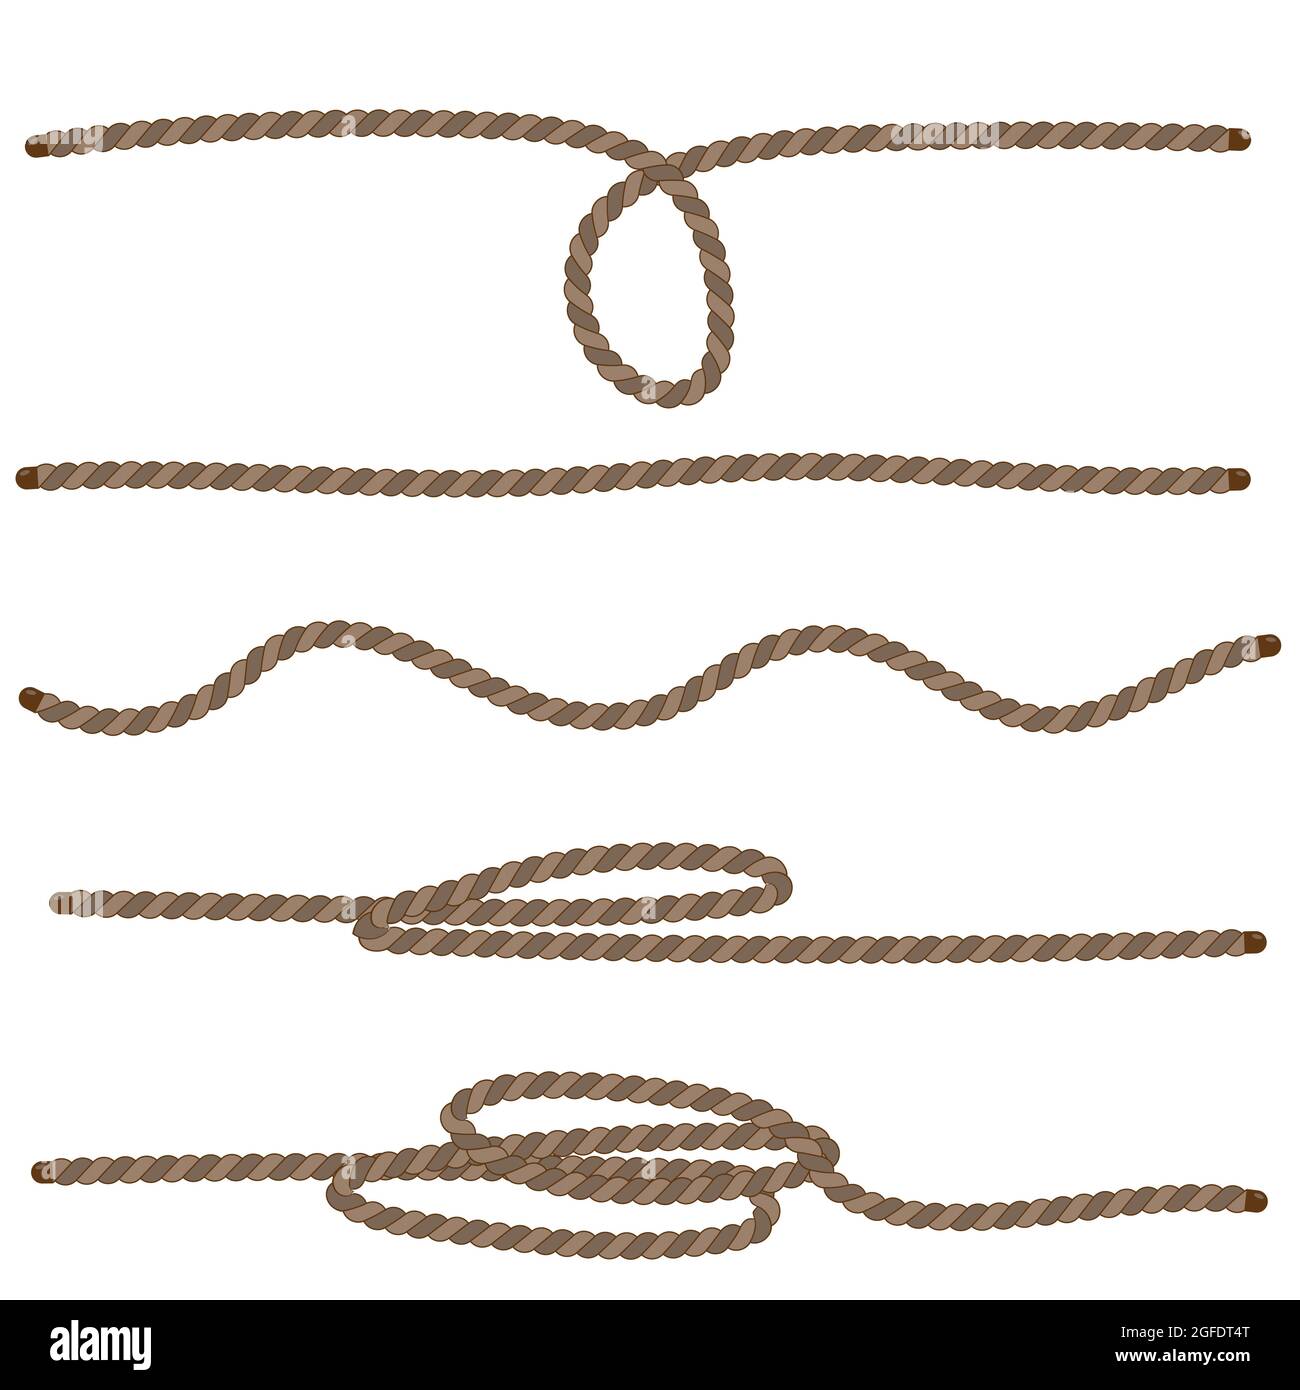 https://c8.alamy.com/comp/2GFDT4T/braun-natural-jute-rope-set-vector-illustration-twine-collection-isolated-on-white-background-packthread-clipart-2GFDT4T.jpg